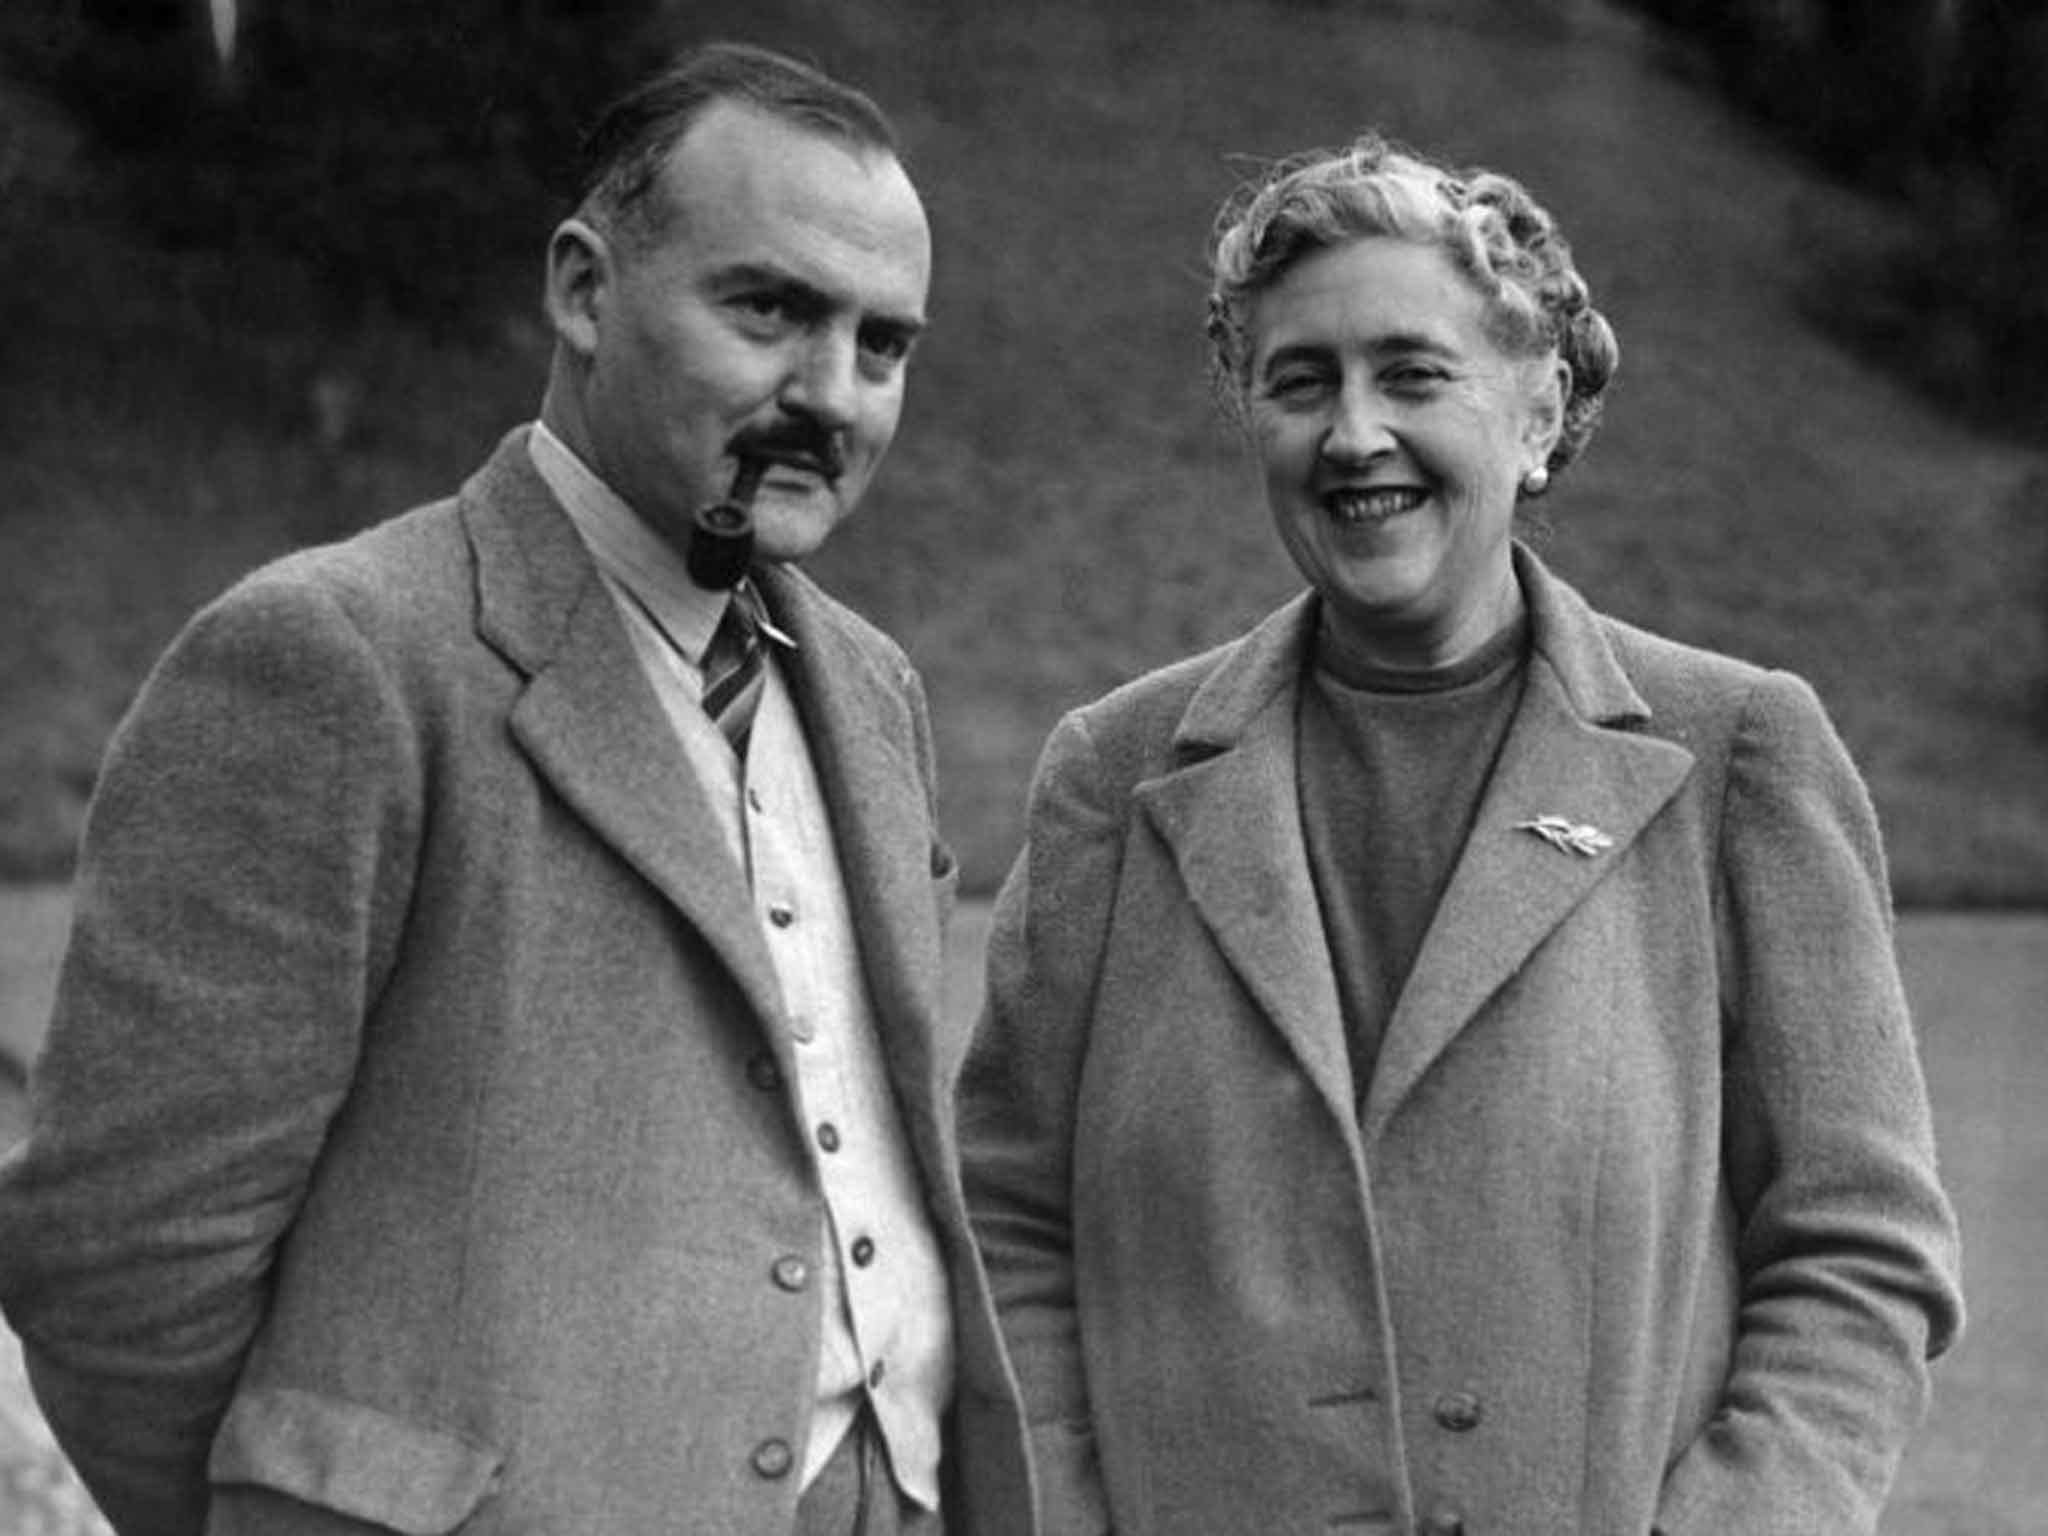 &#13;
Agatha Christie with her second husband, Max Mallowan. She vanished for 11 days when she discovered her first husband Archie was having an affair. She turned up in Harrogate &#13;